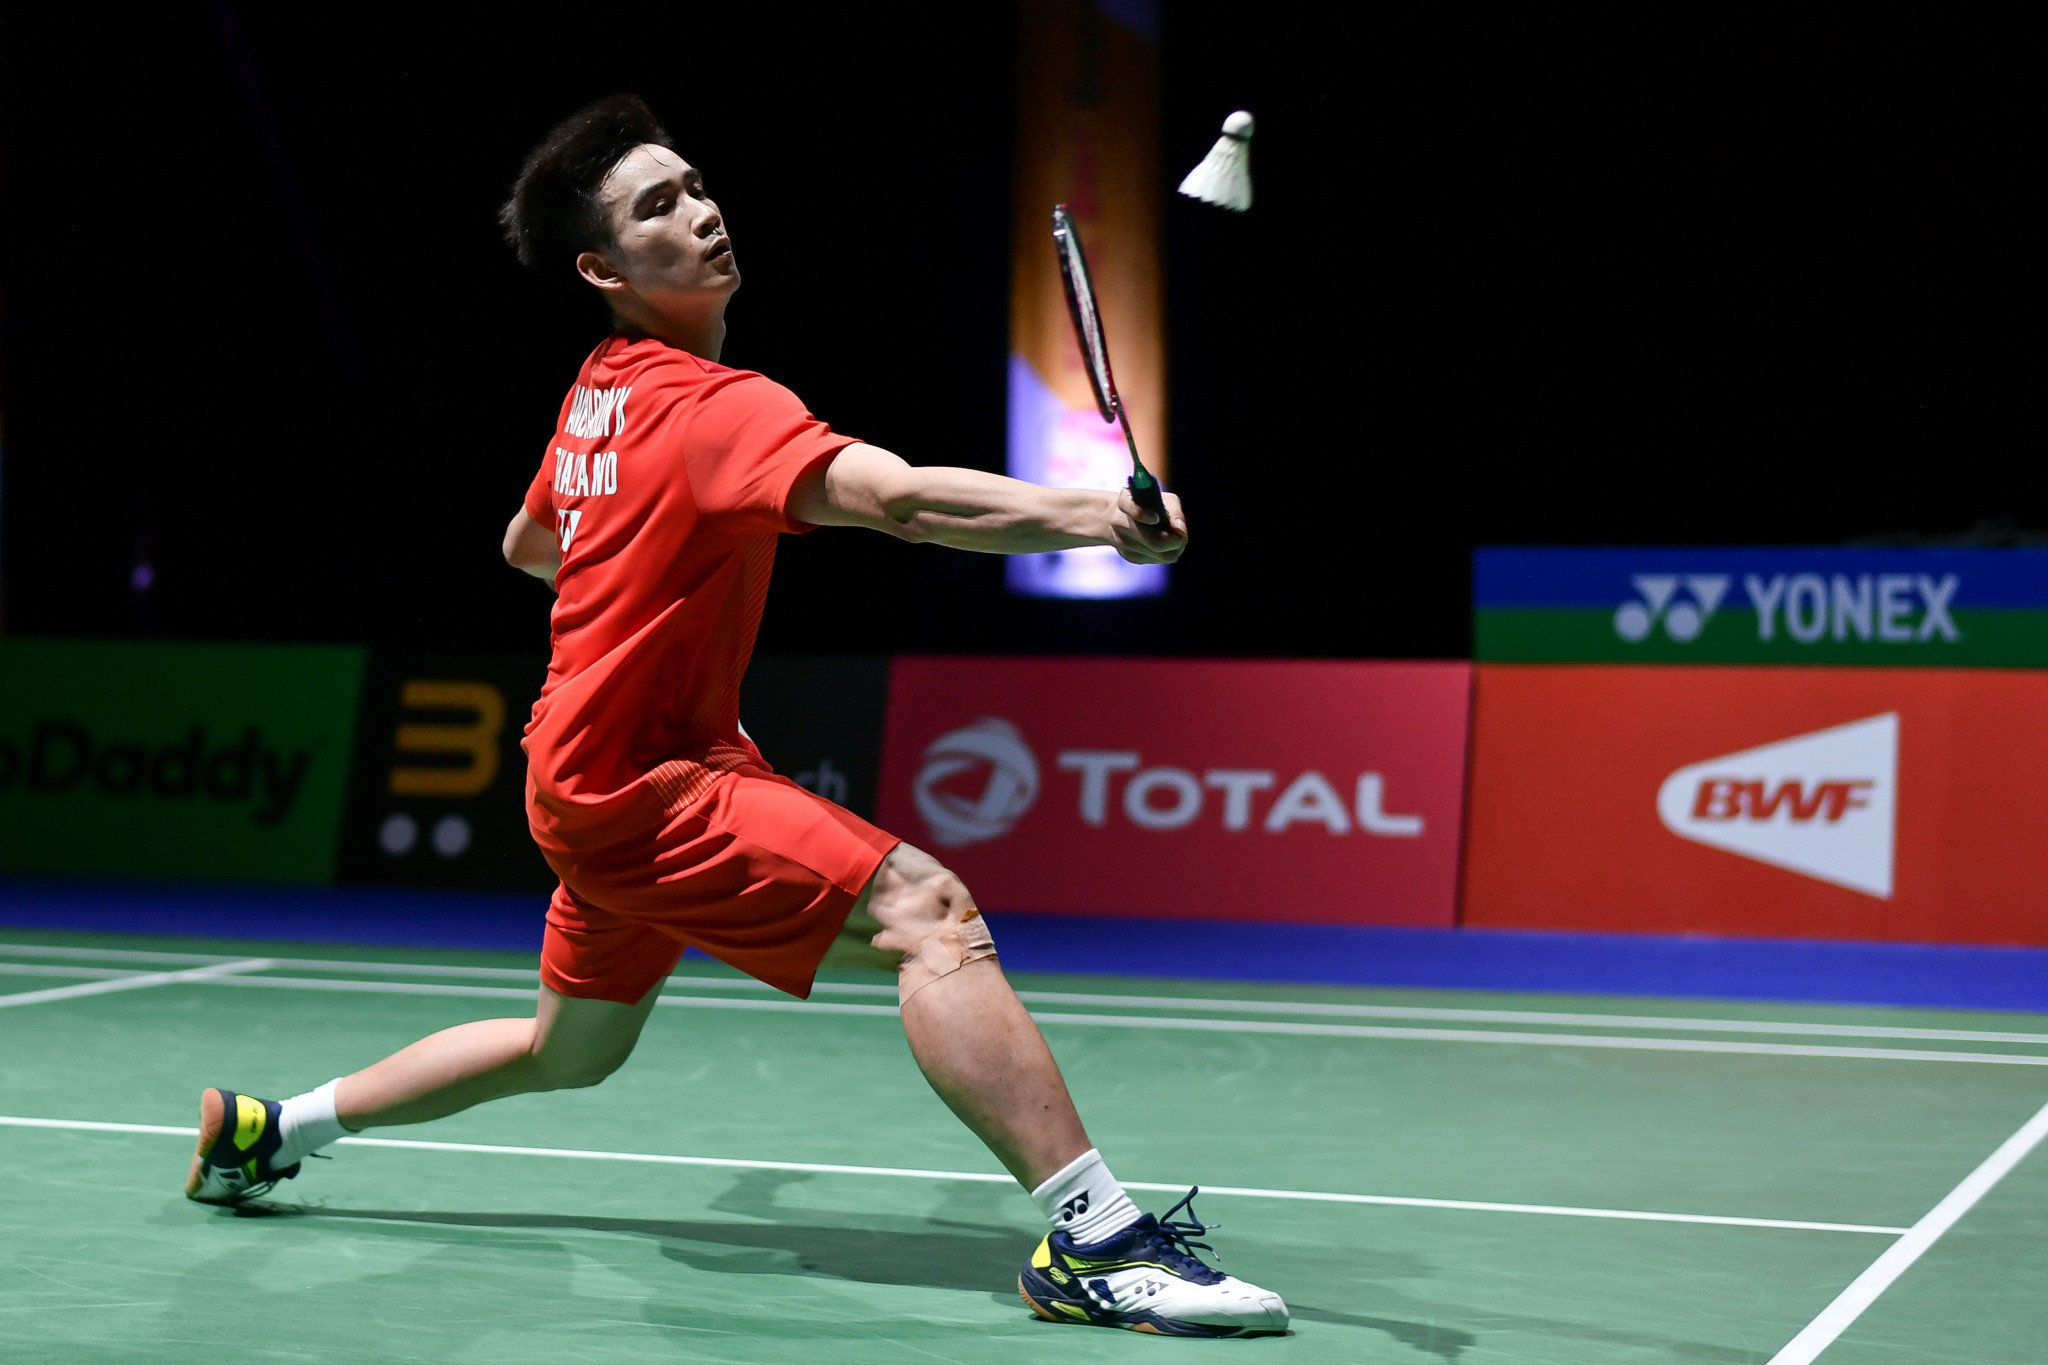 TotalEnergies has been the title sponsor of BWF major events since 2015 ©Getty Images